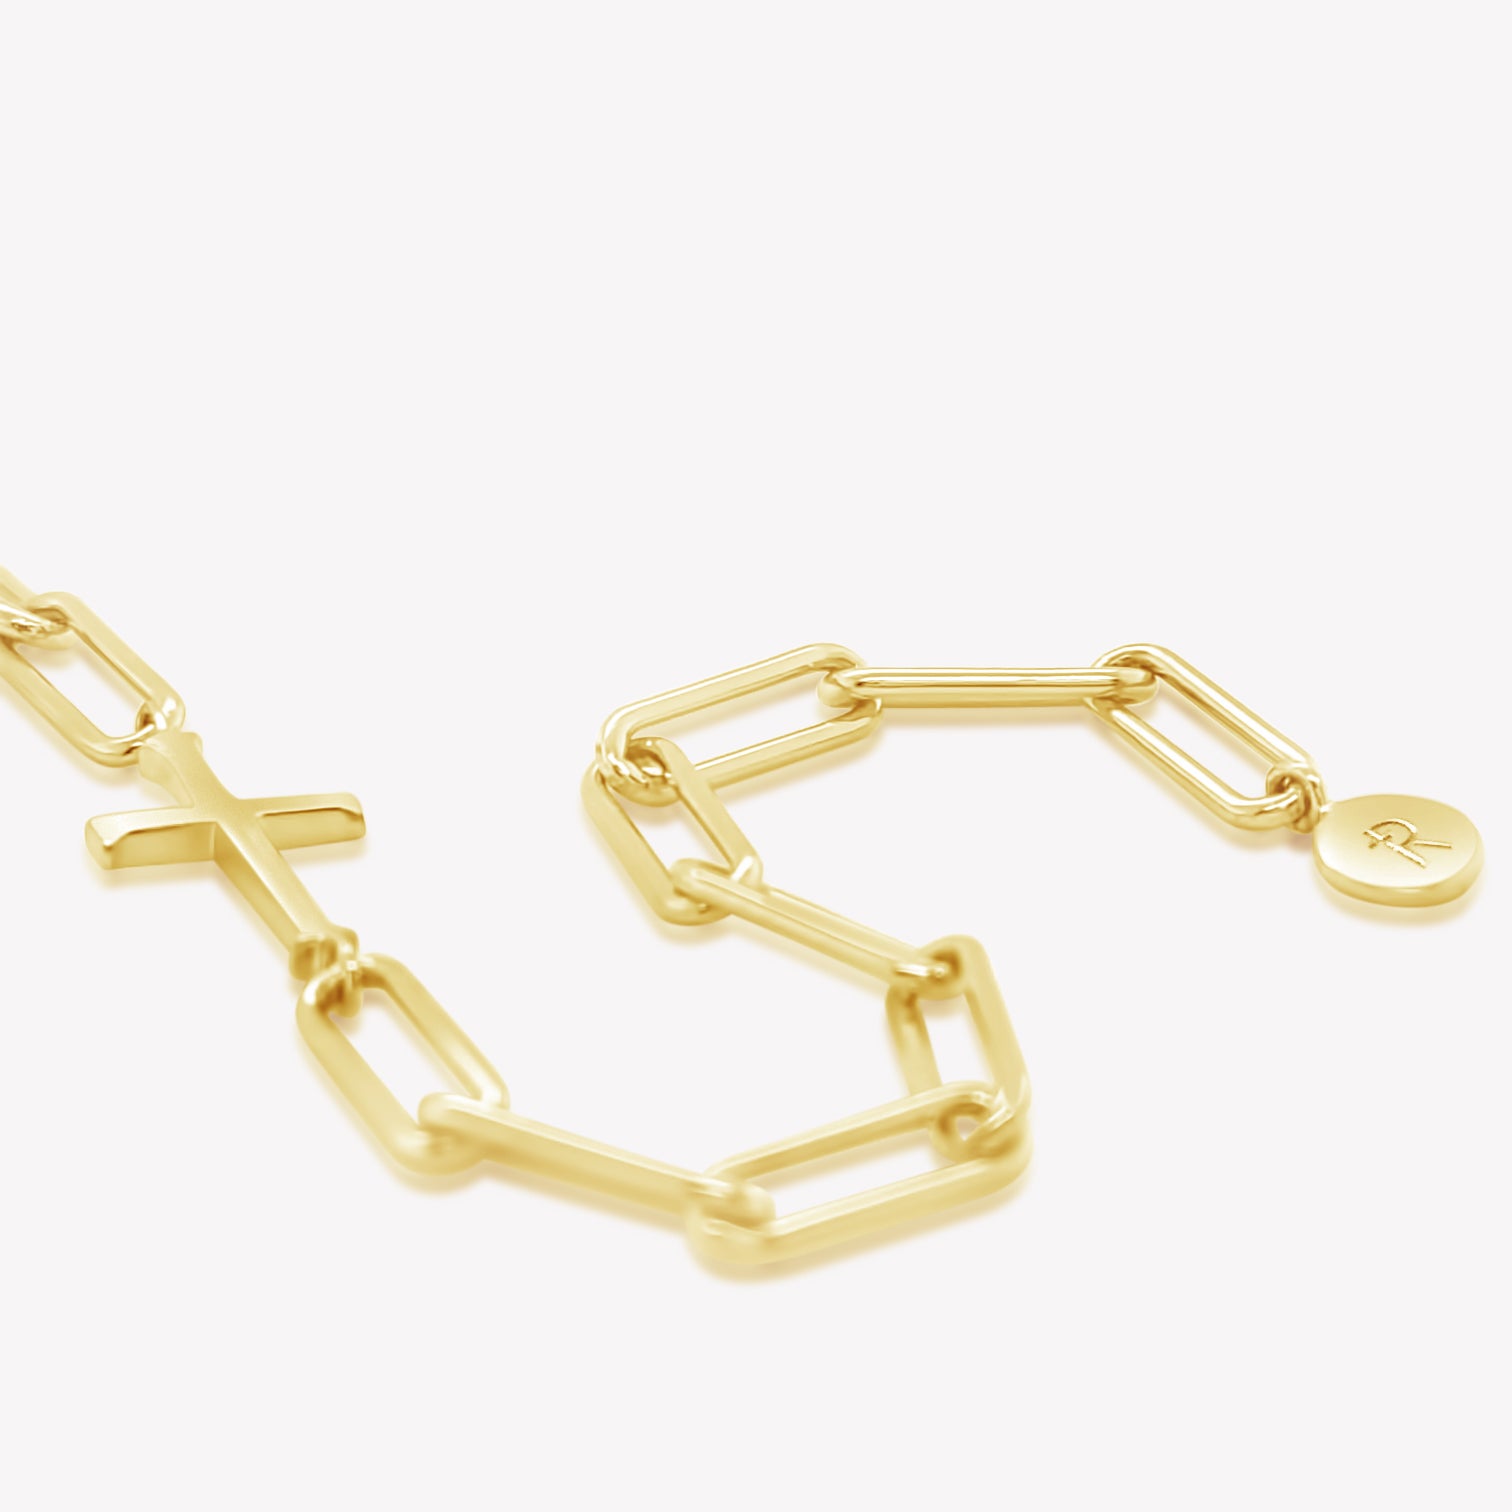 Rizen Jewelry Chain Breaker bracelet in 18kt yellow gold.  Elegant Cross Pendant breaks up the contemporary paper clip link chain with circular Rizen tag on last link of chain.